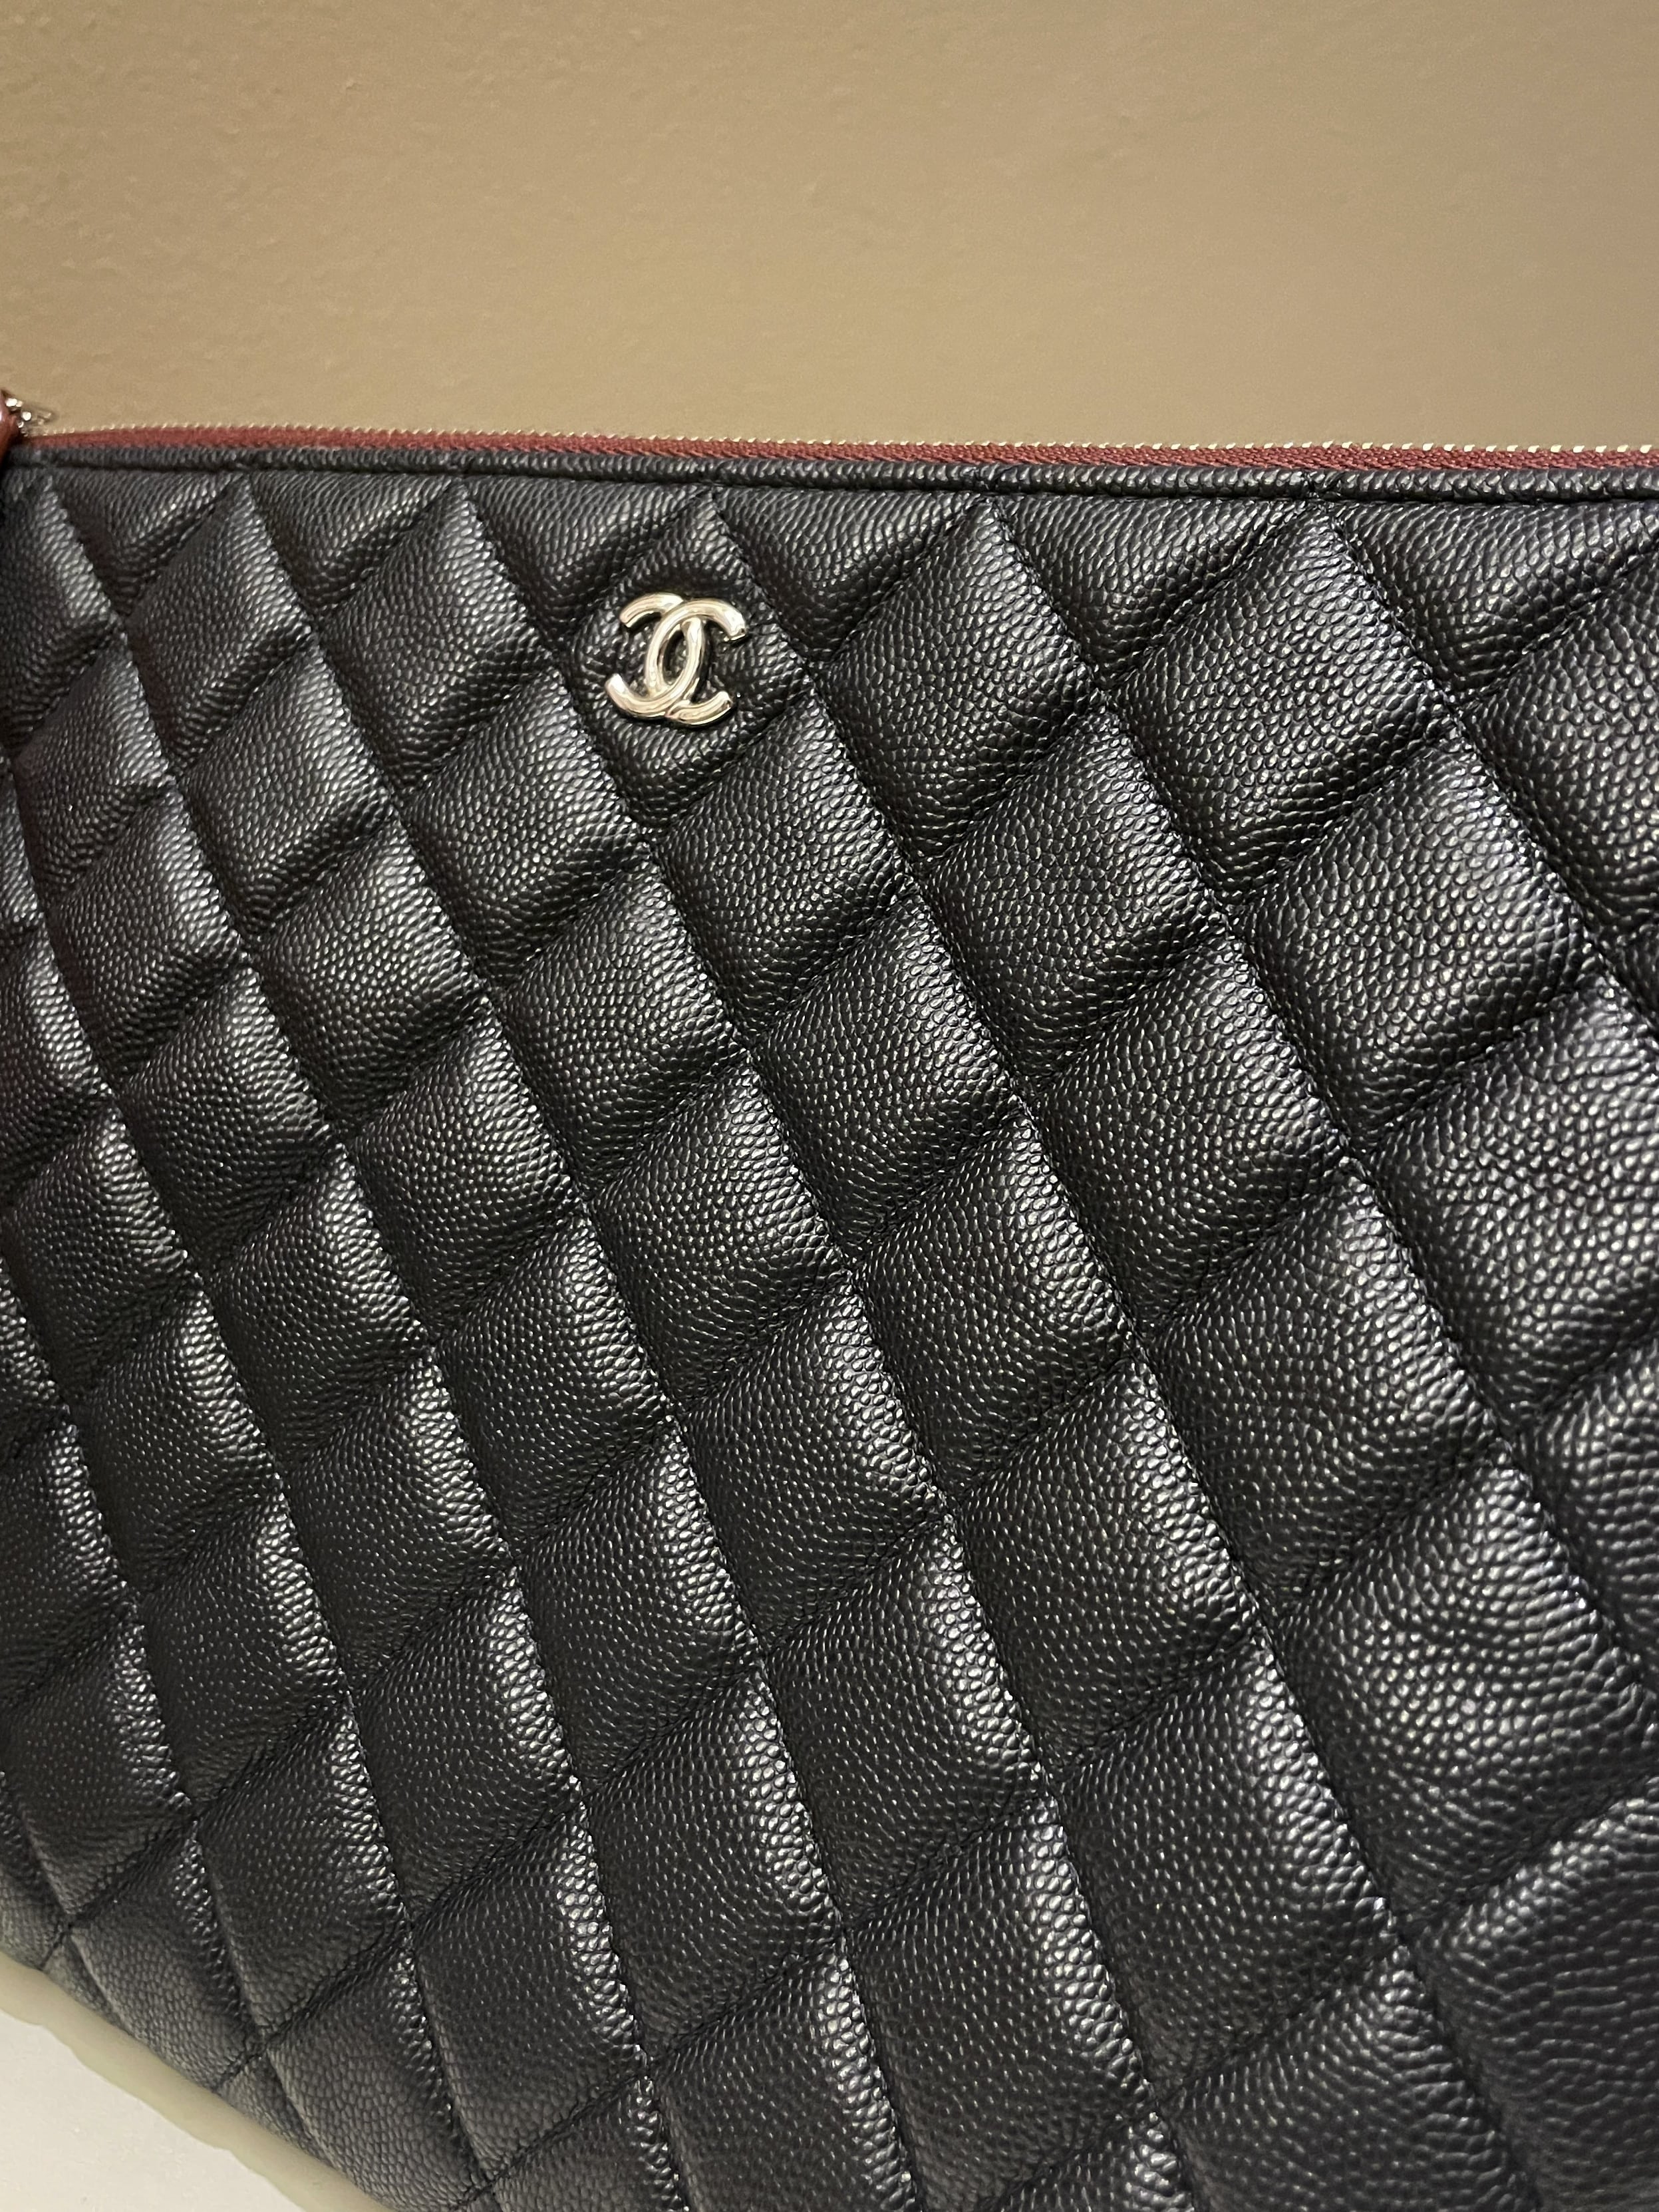 Chanel Classic Quilted Ocase Clutch
Black Caviar